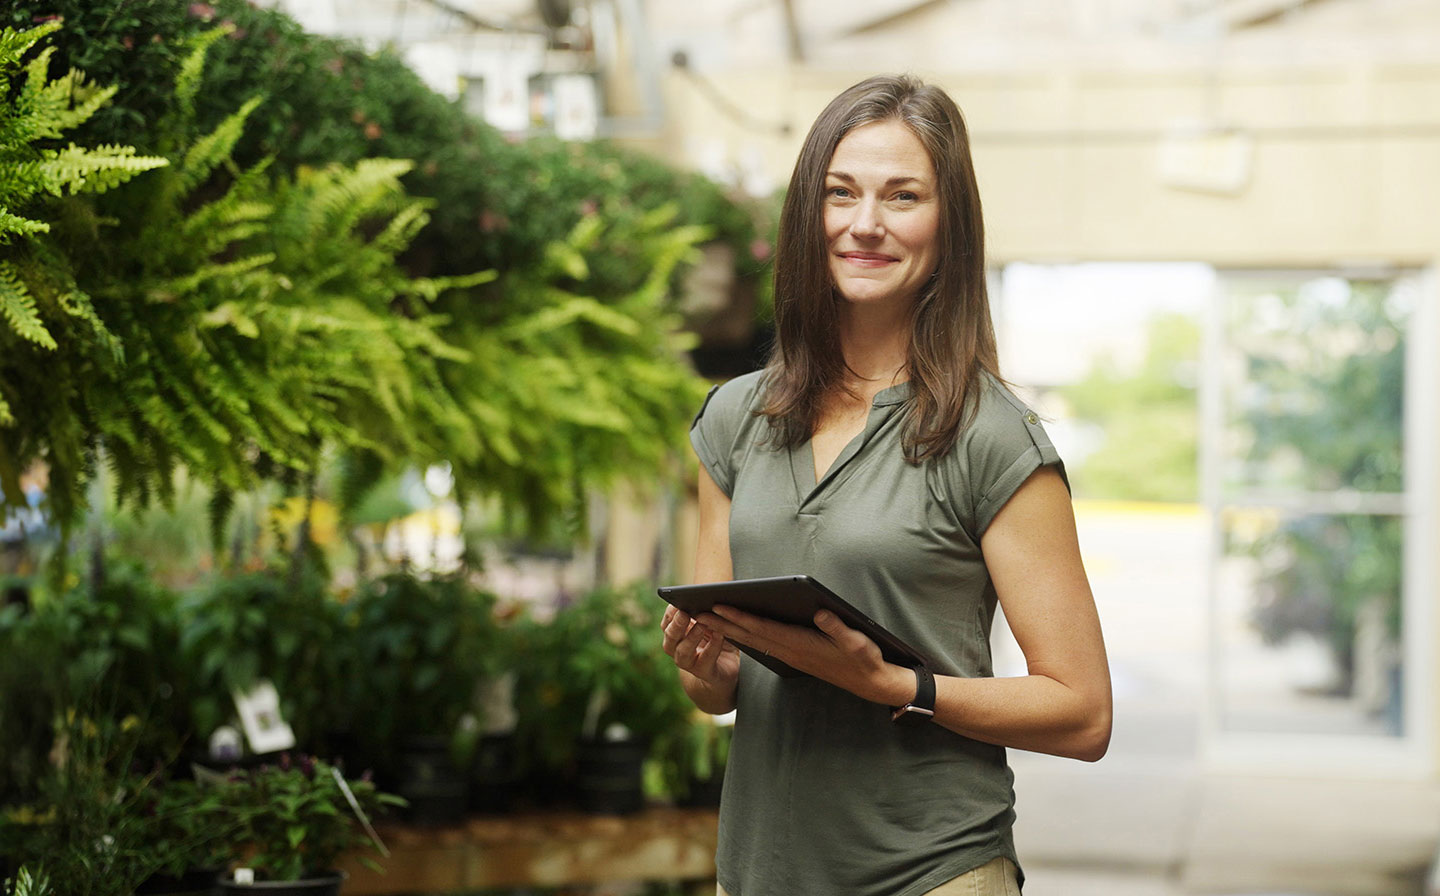 Woman working in a garden nursery smiling and holding a tablet